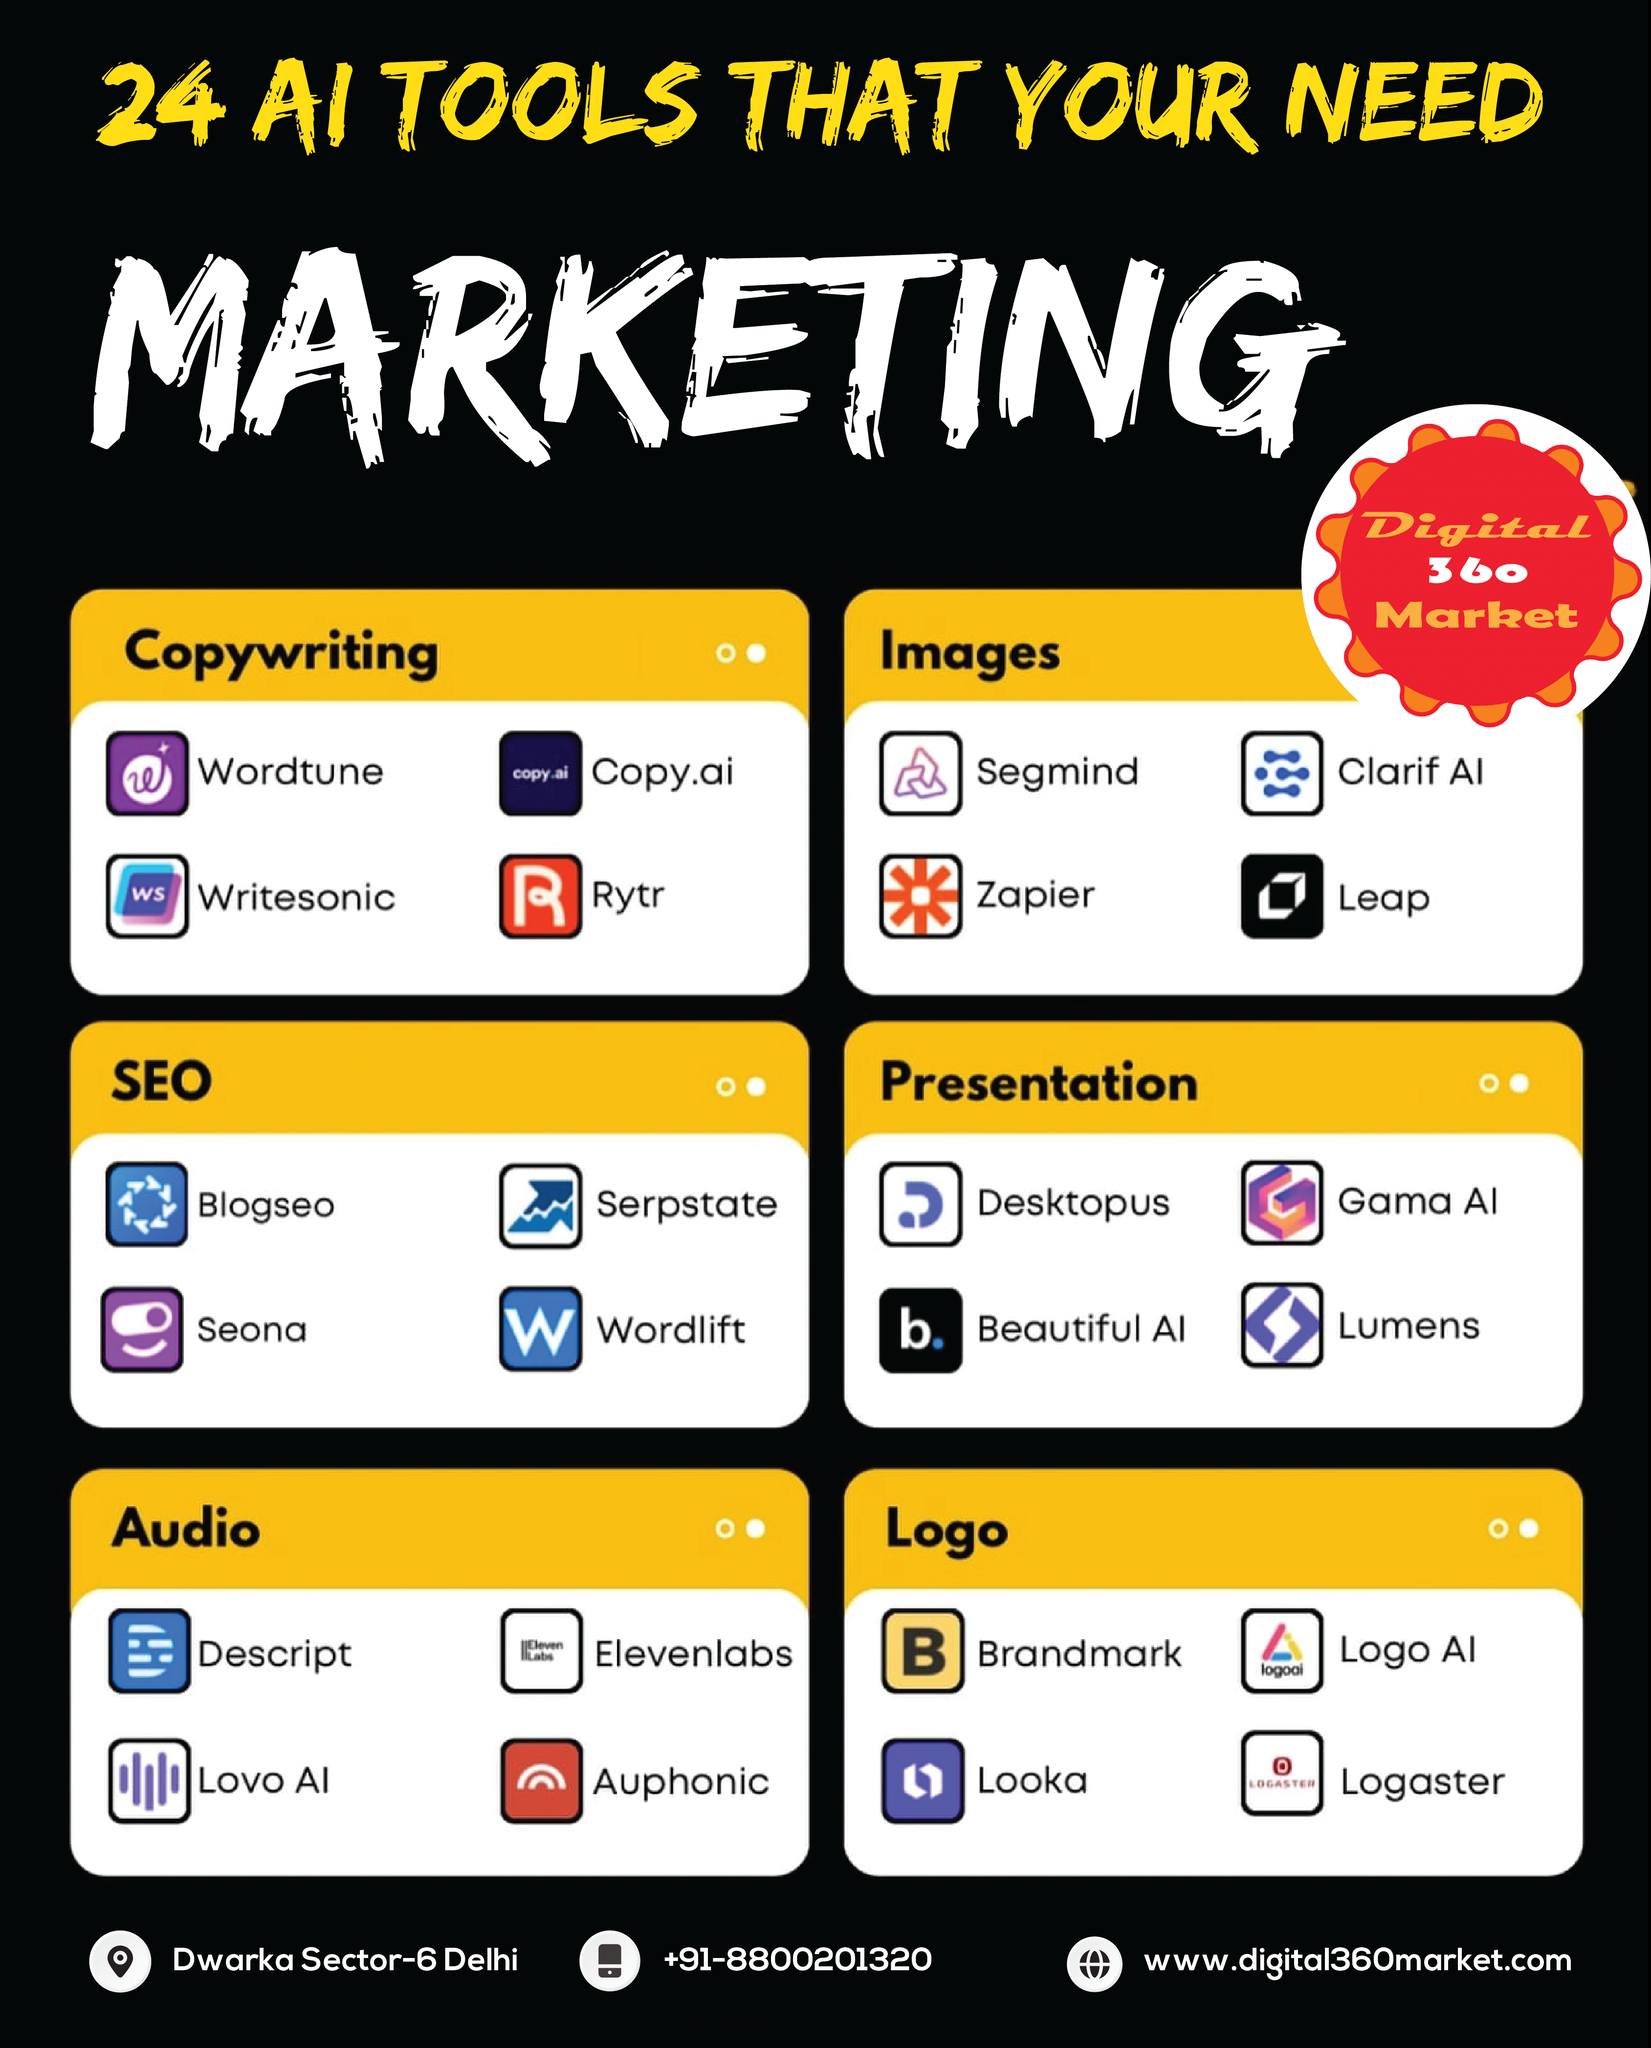 24 AI tools that you need for MARKETING!